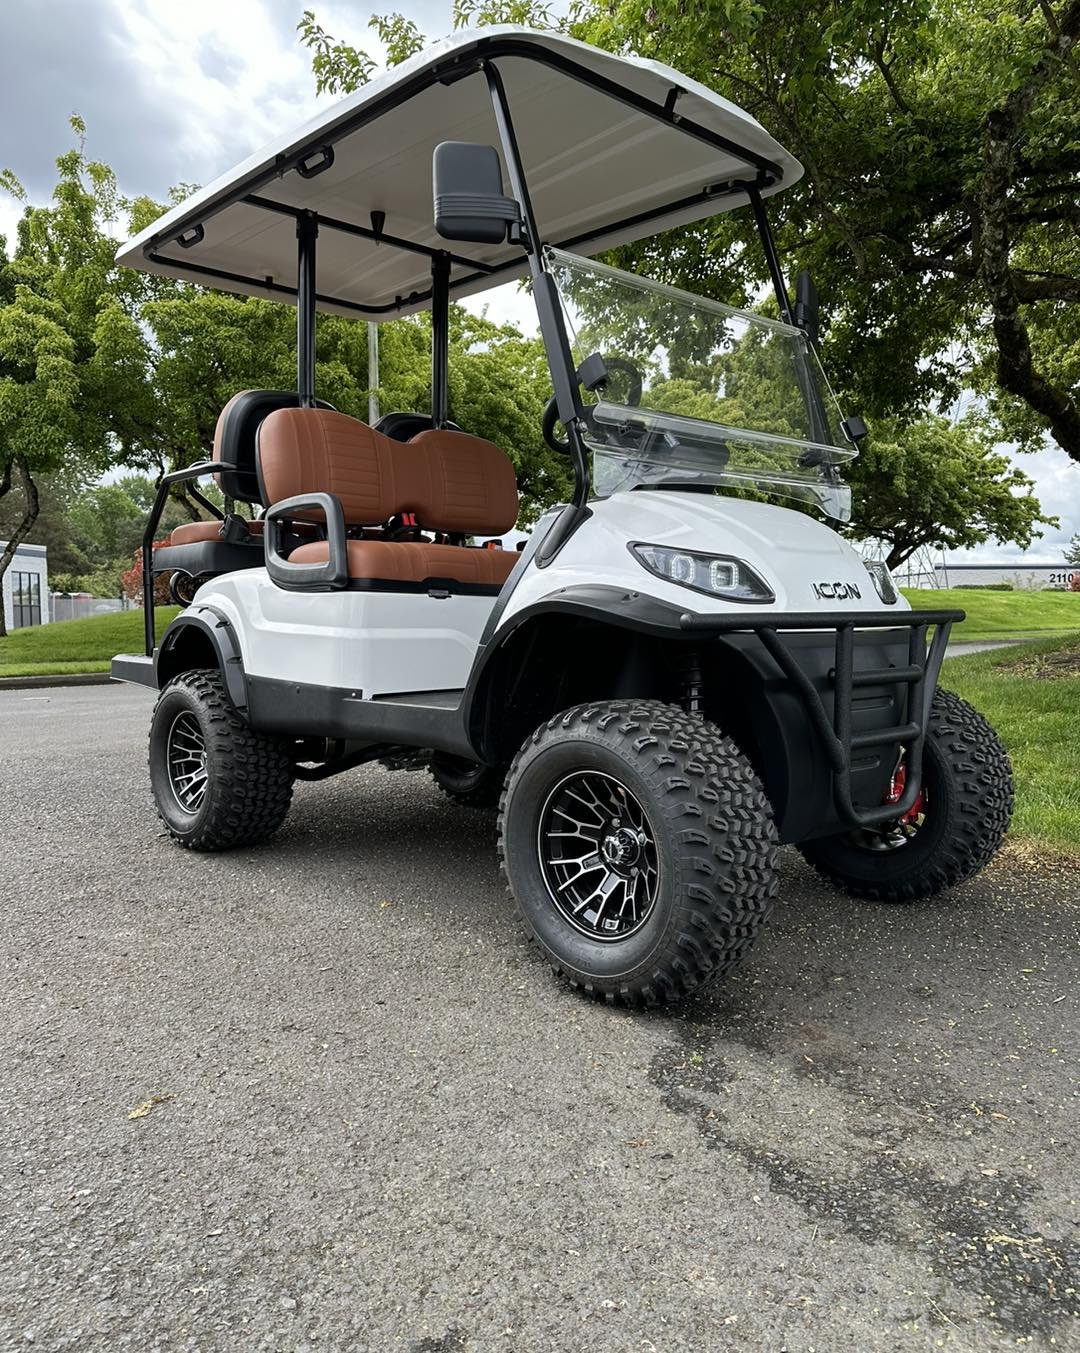 The shop favorite lifted 4 seater. Lithium performance. 10 inch touchscreen dash. Come check out the new 2024 icon line. Promo financing available including 0% interest for 36 months. #iconcarts #iconic